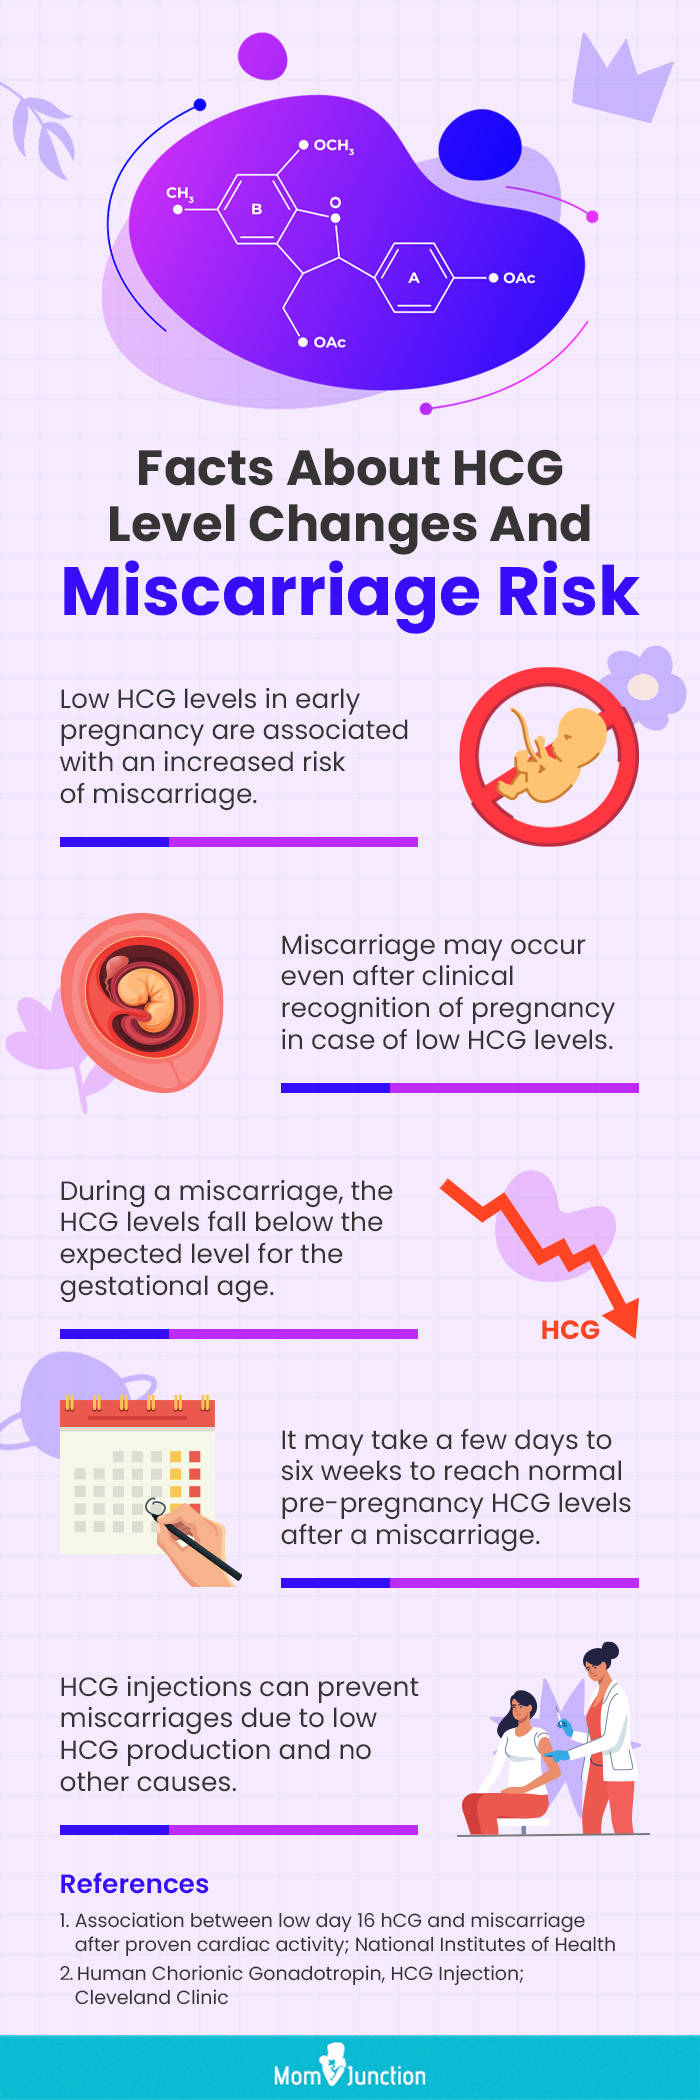 hcg level changes and miscarriage risk (infographic)